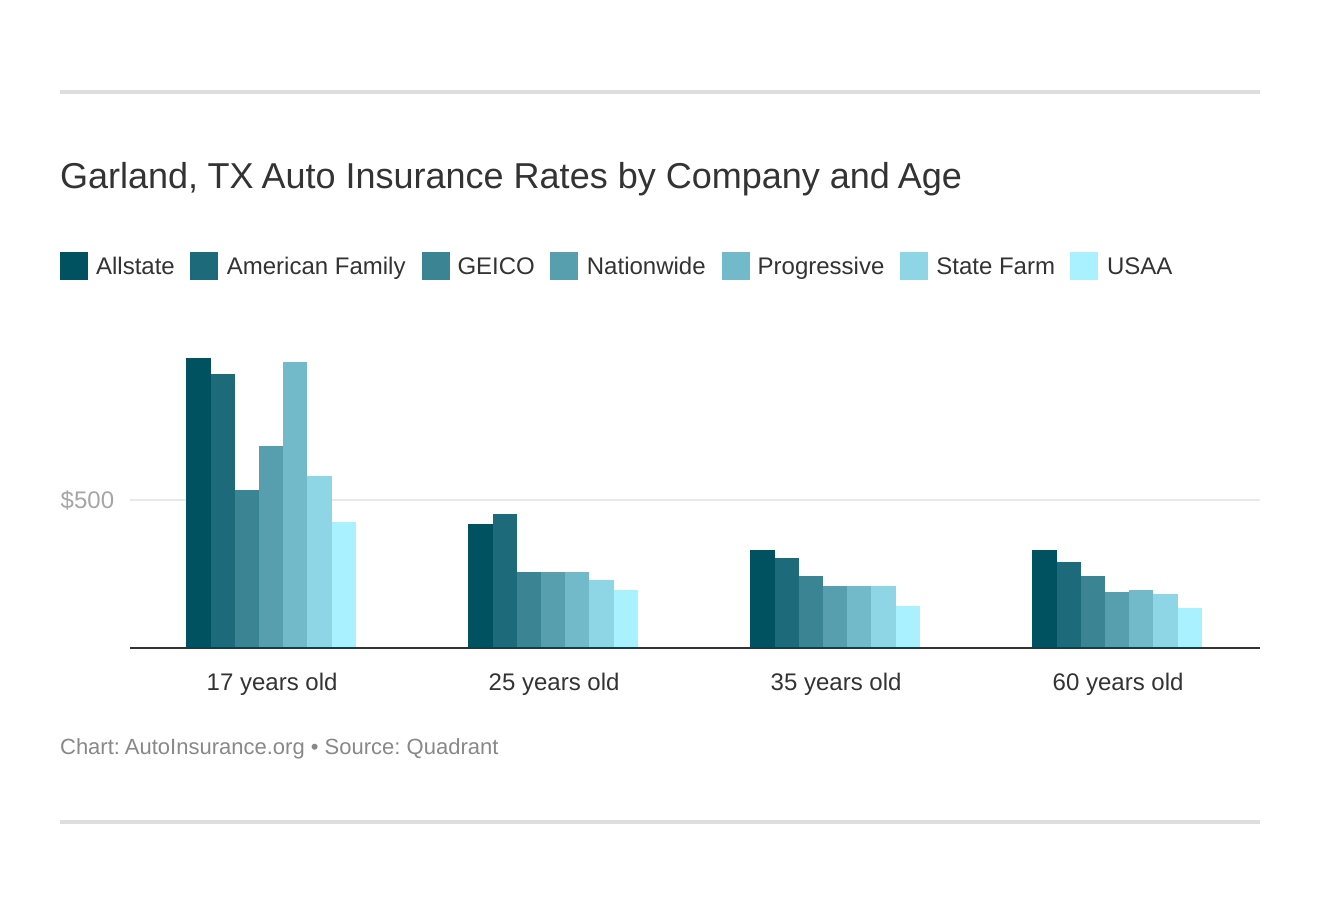 Garland, TX Auto Insurance Rates by Company and Age